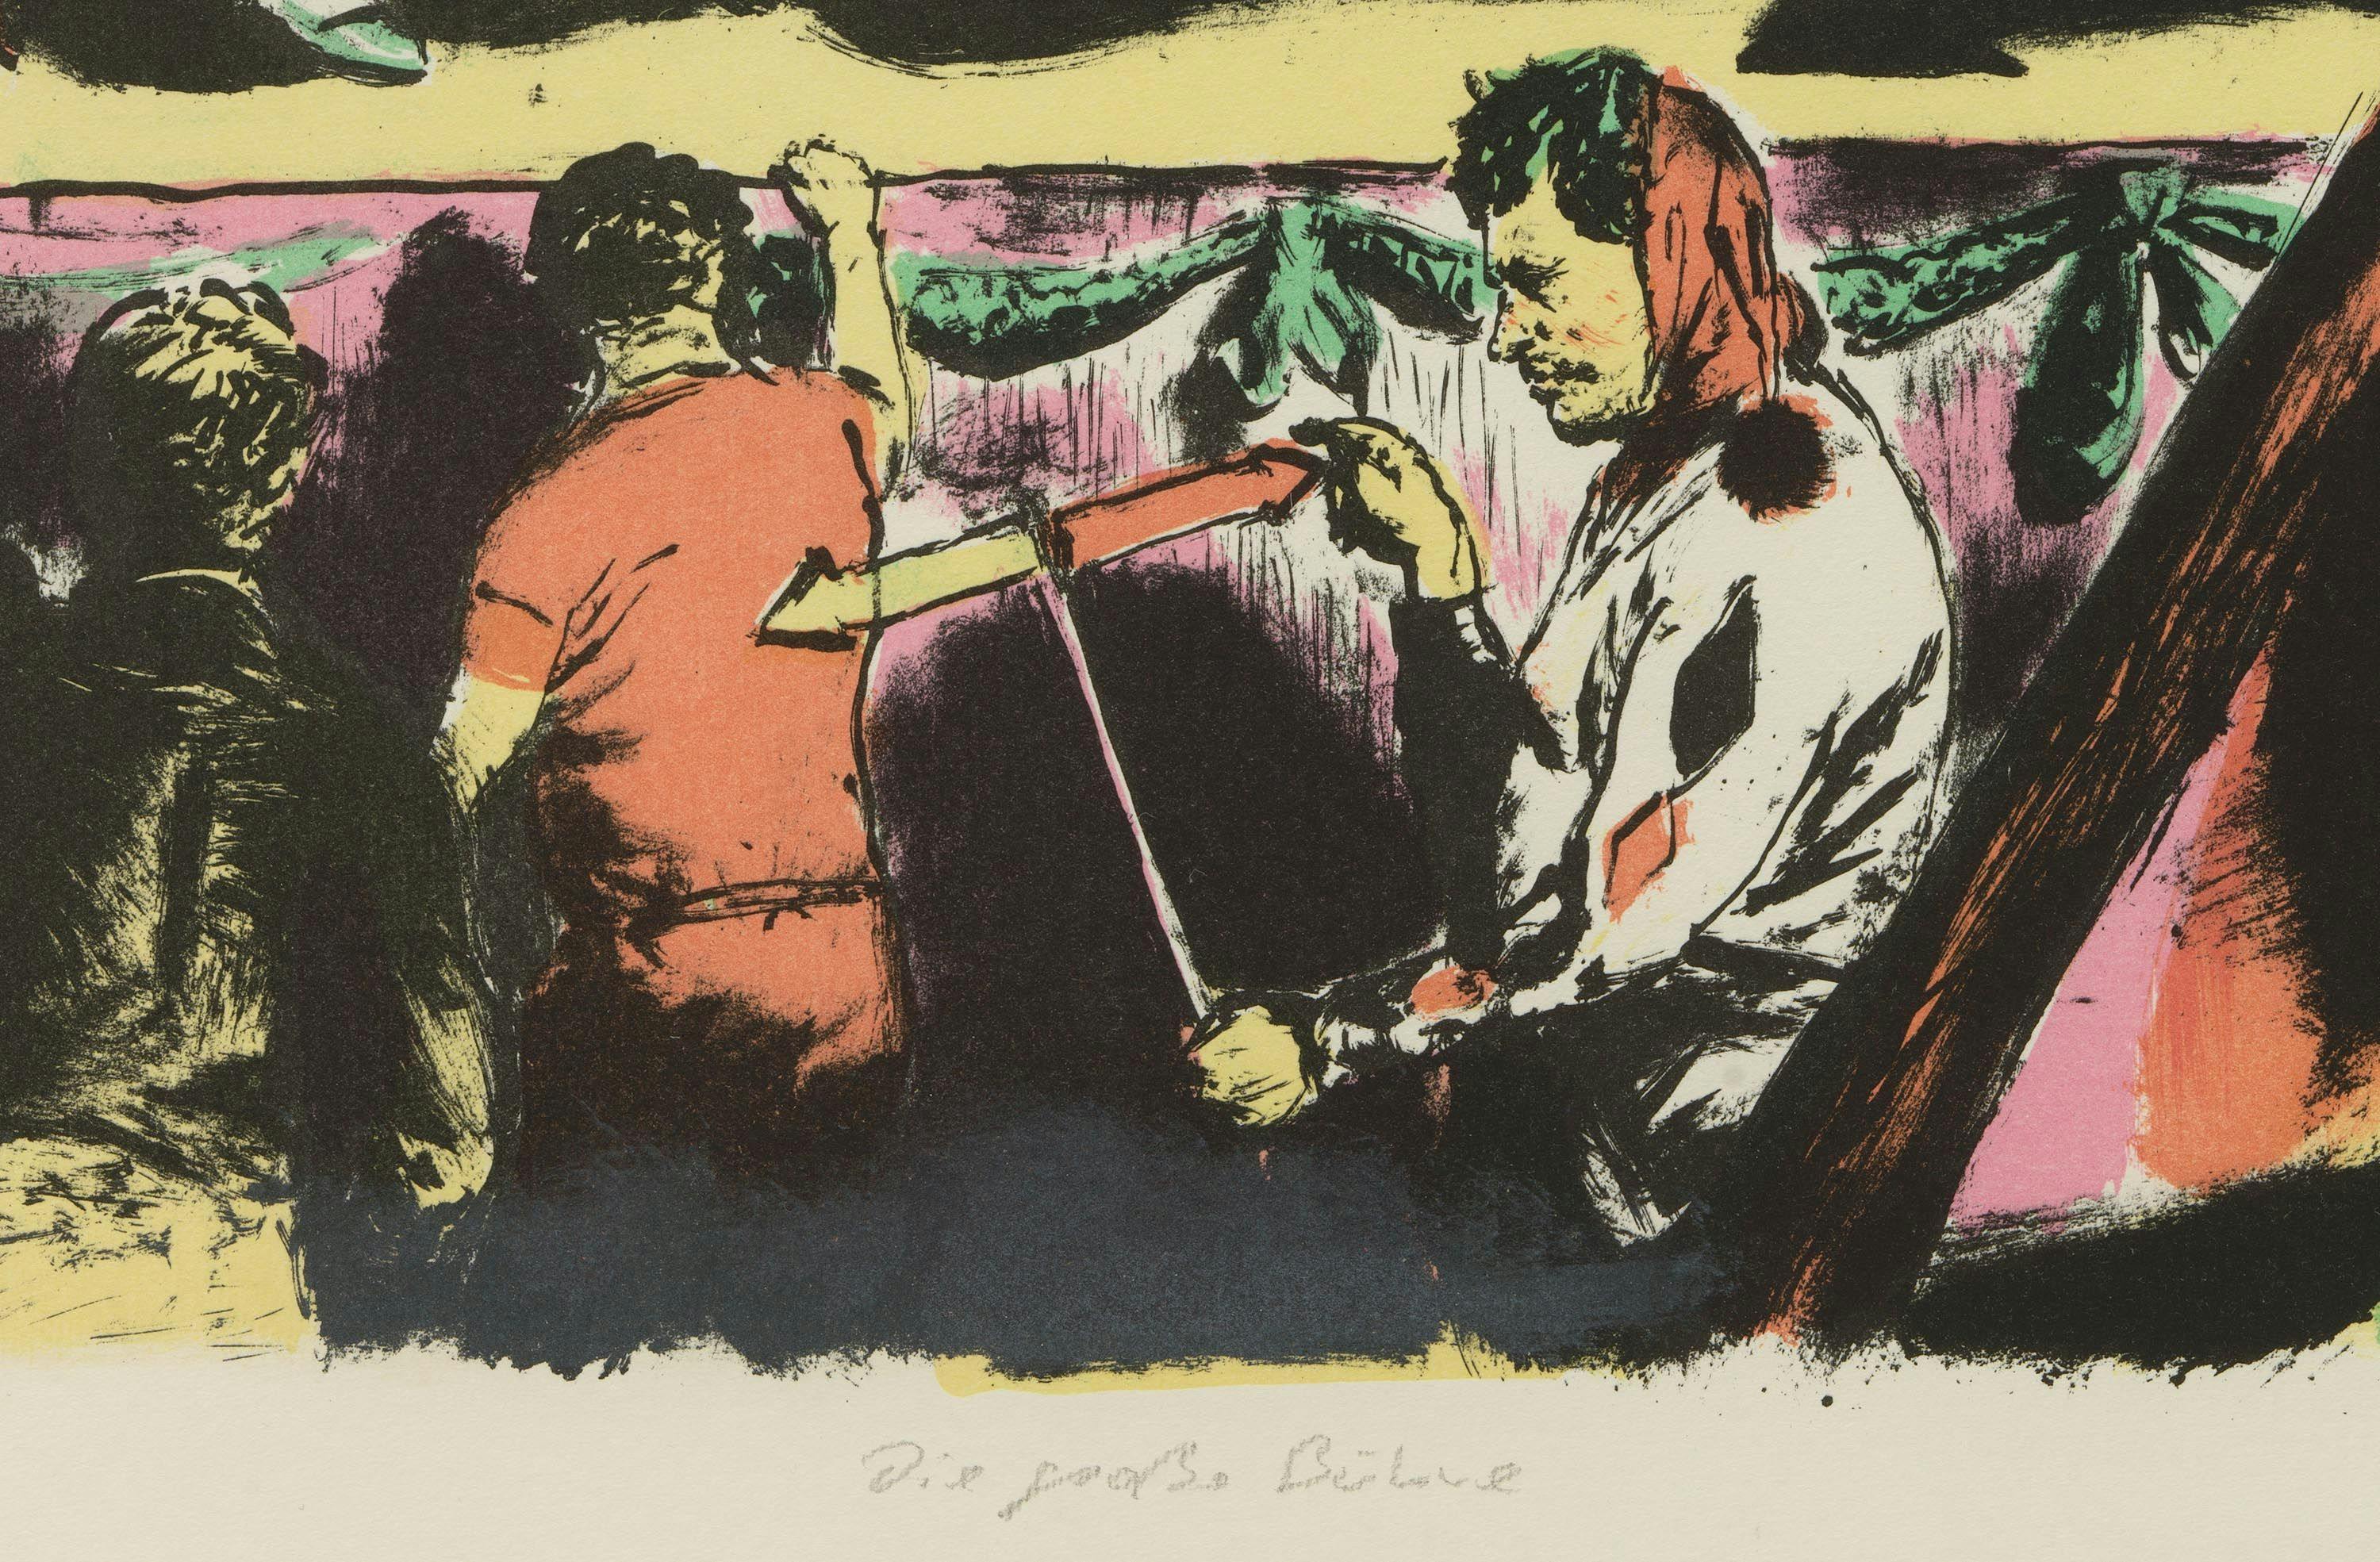 A detail from a print by Neo Rauch, titled Die große Bühne, dated 2022.